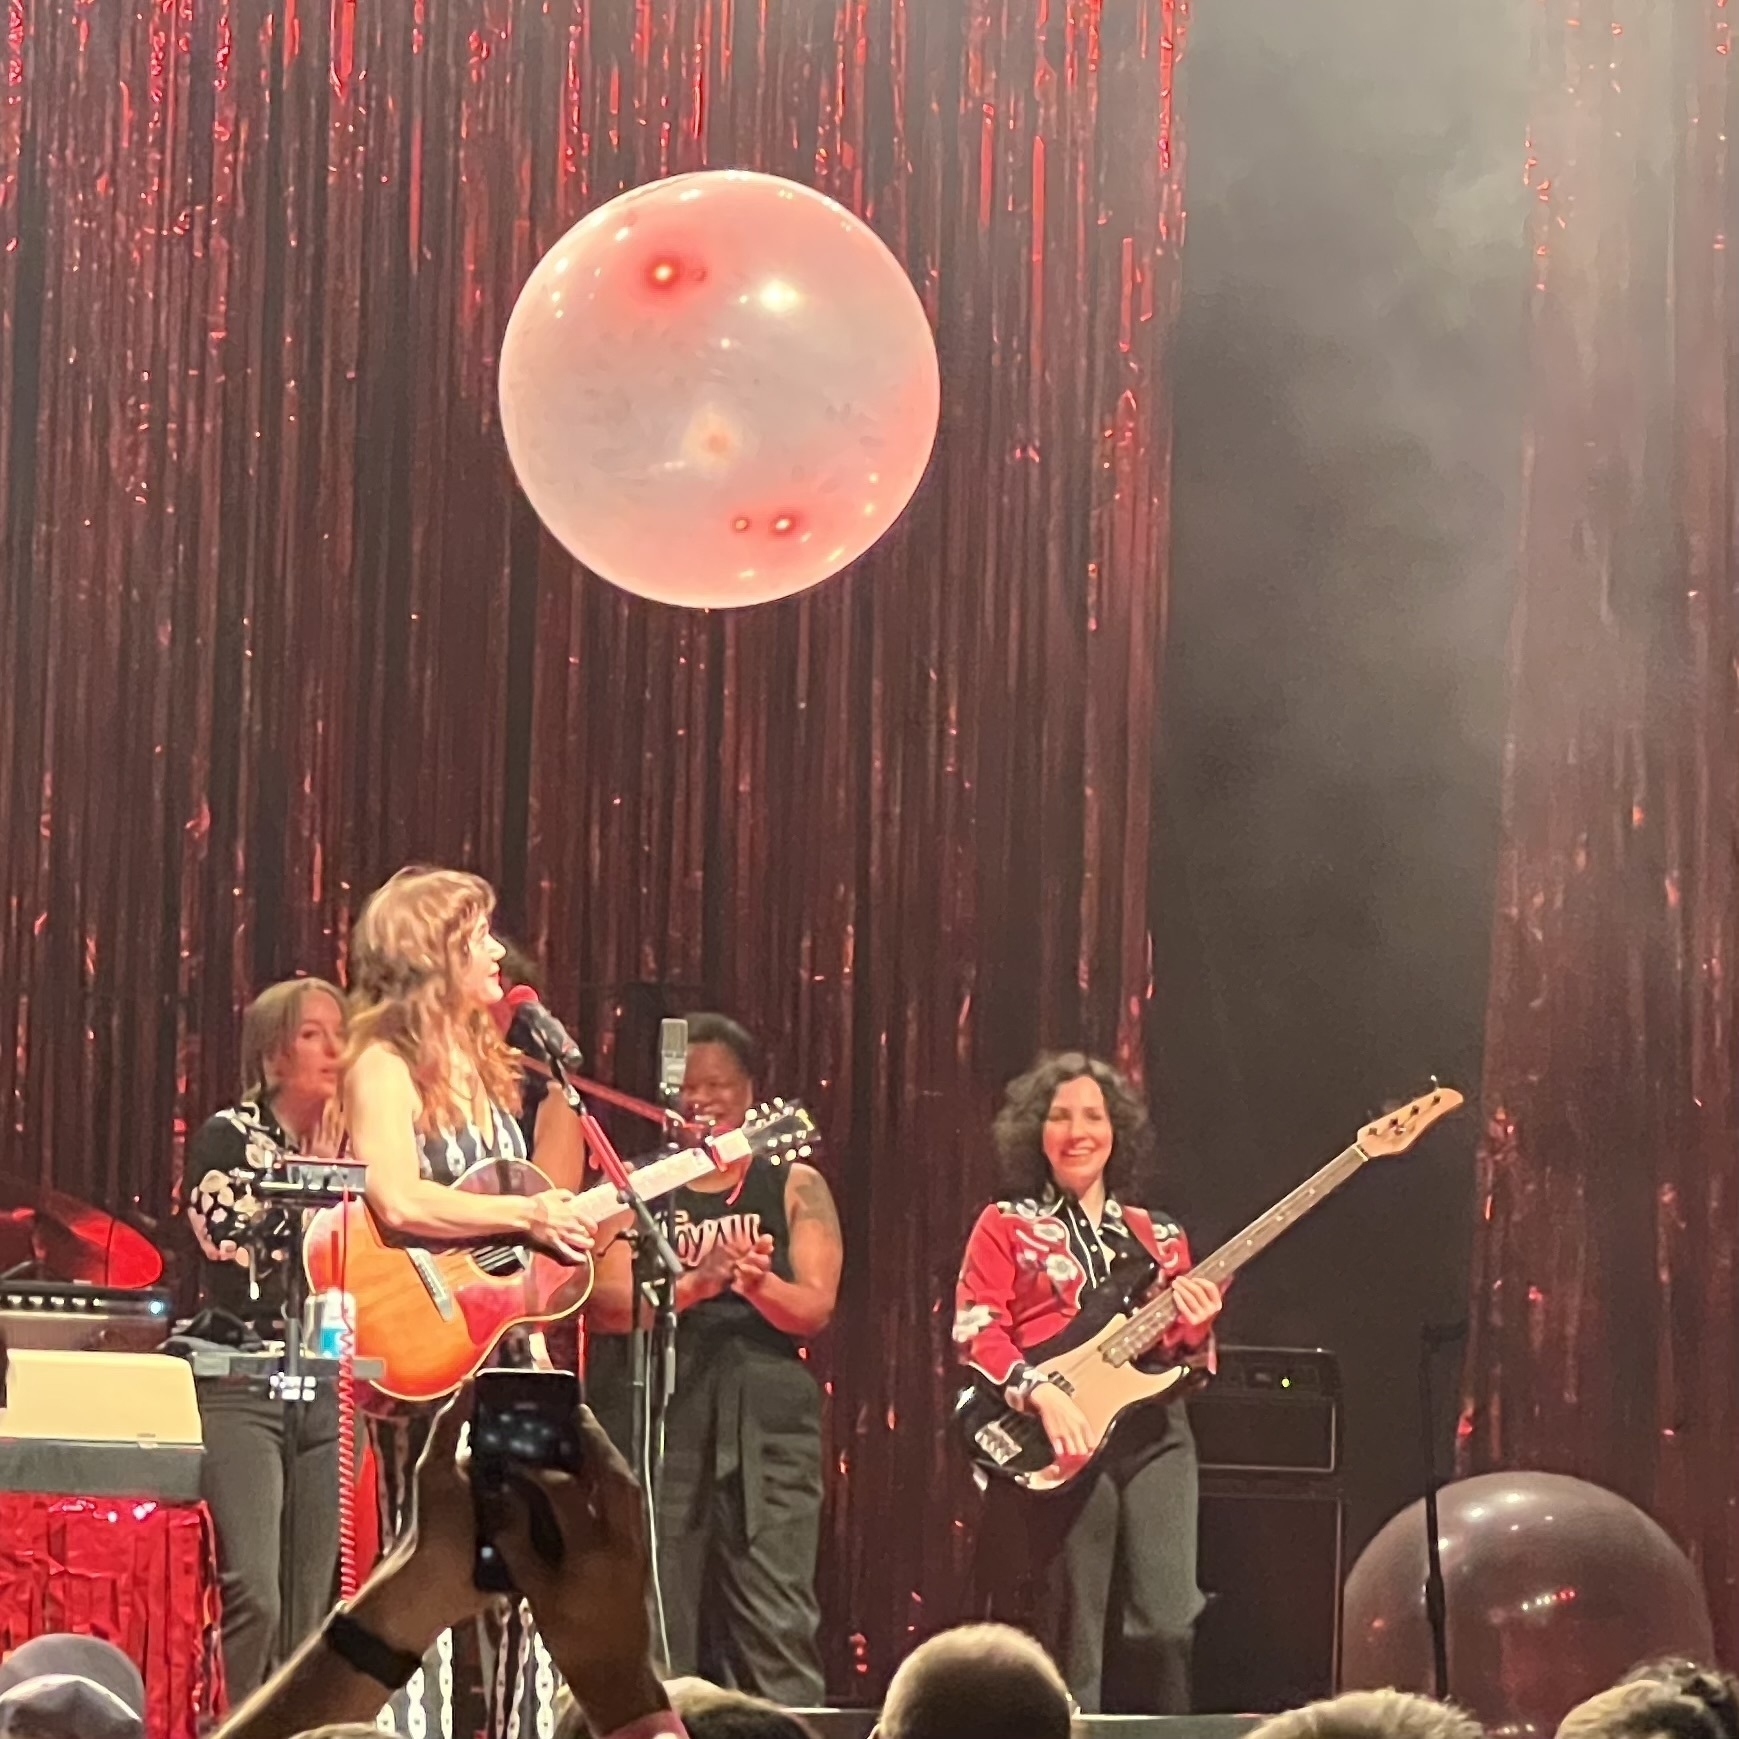 Jenny Lewis and bandmates on stage, laughing, under a suspended balloon.